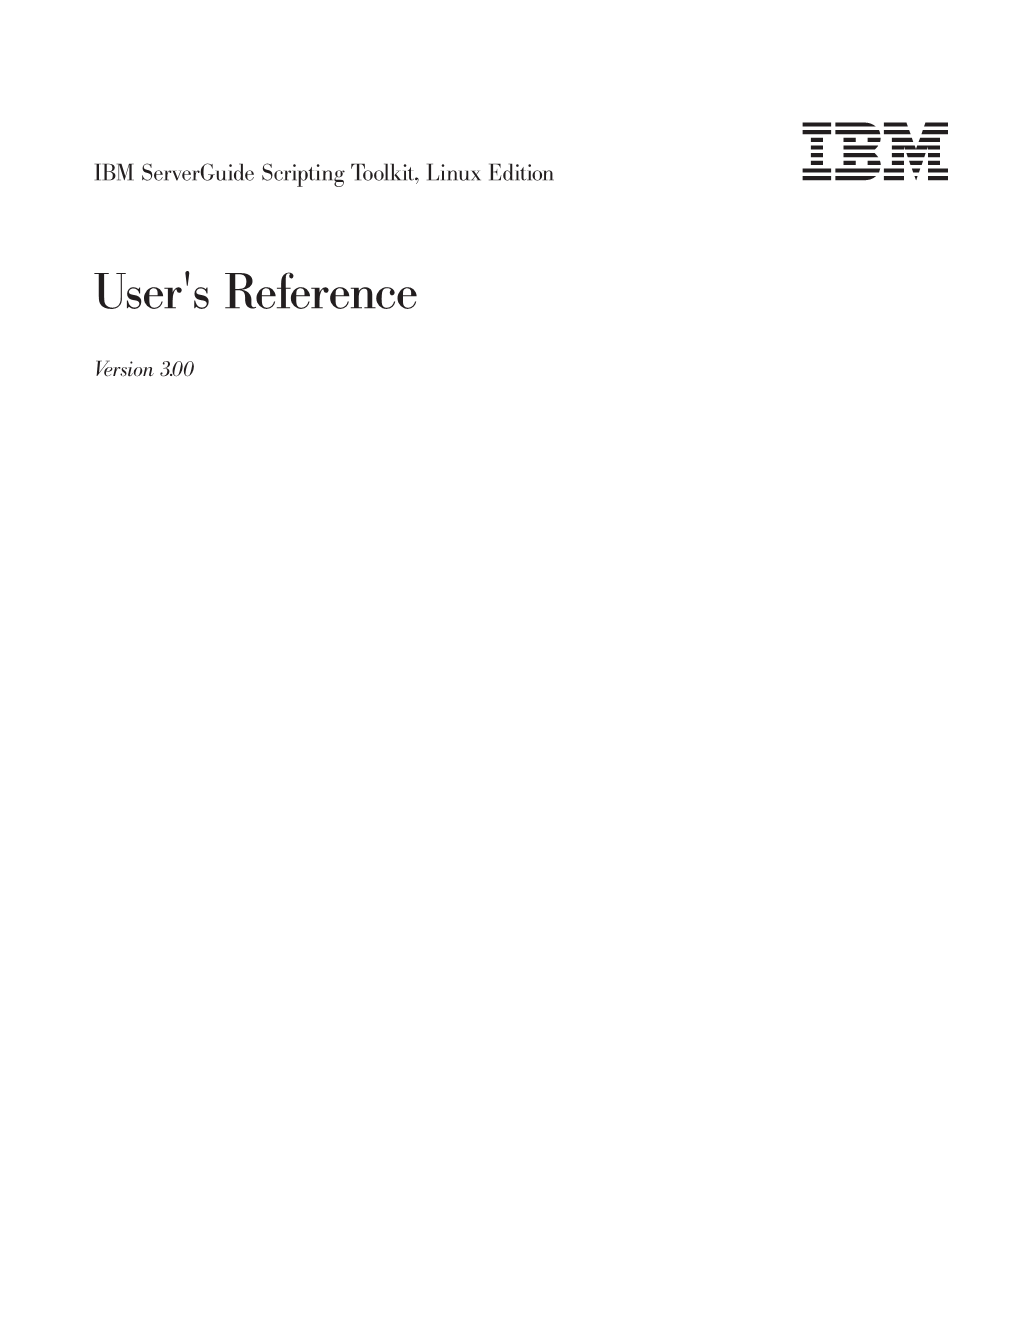 IBM Serverguide Scripting Toolkit, Linux Edition: User's Reference Chapter 1